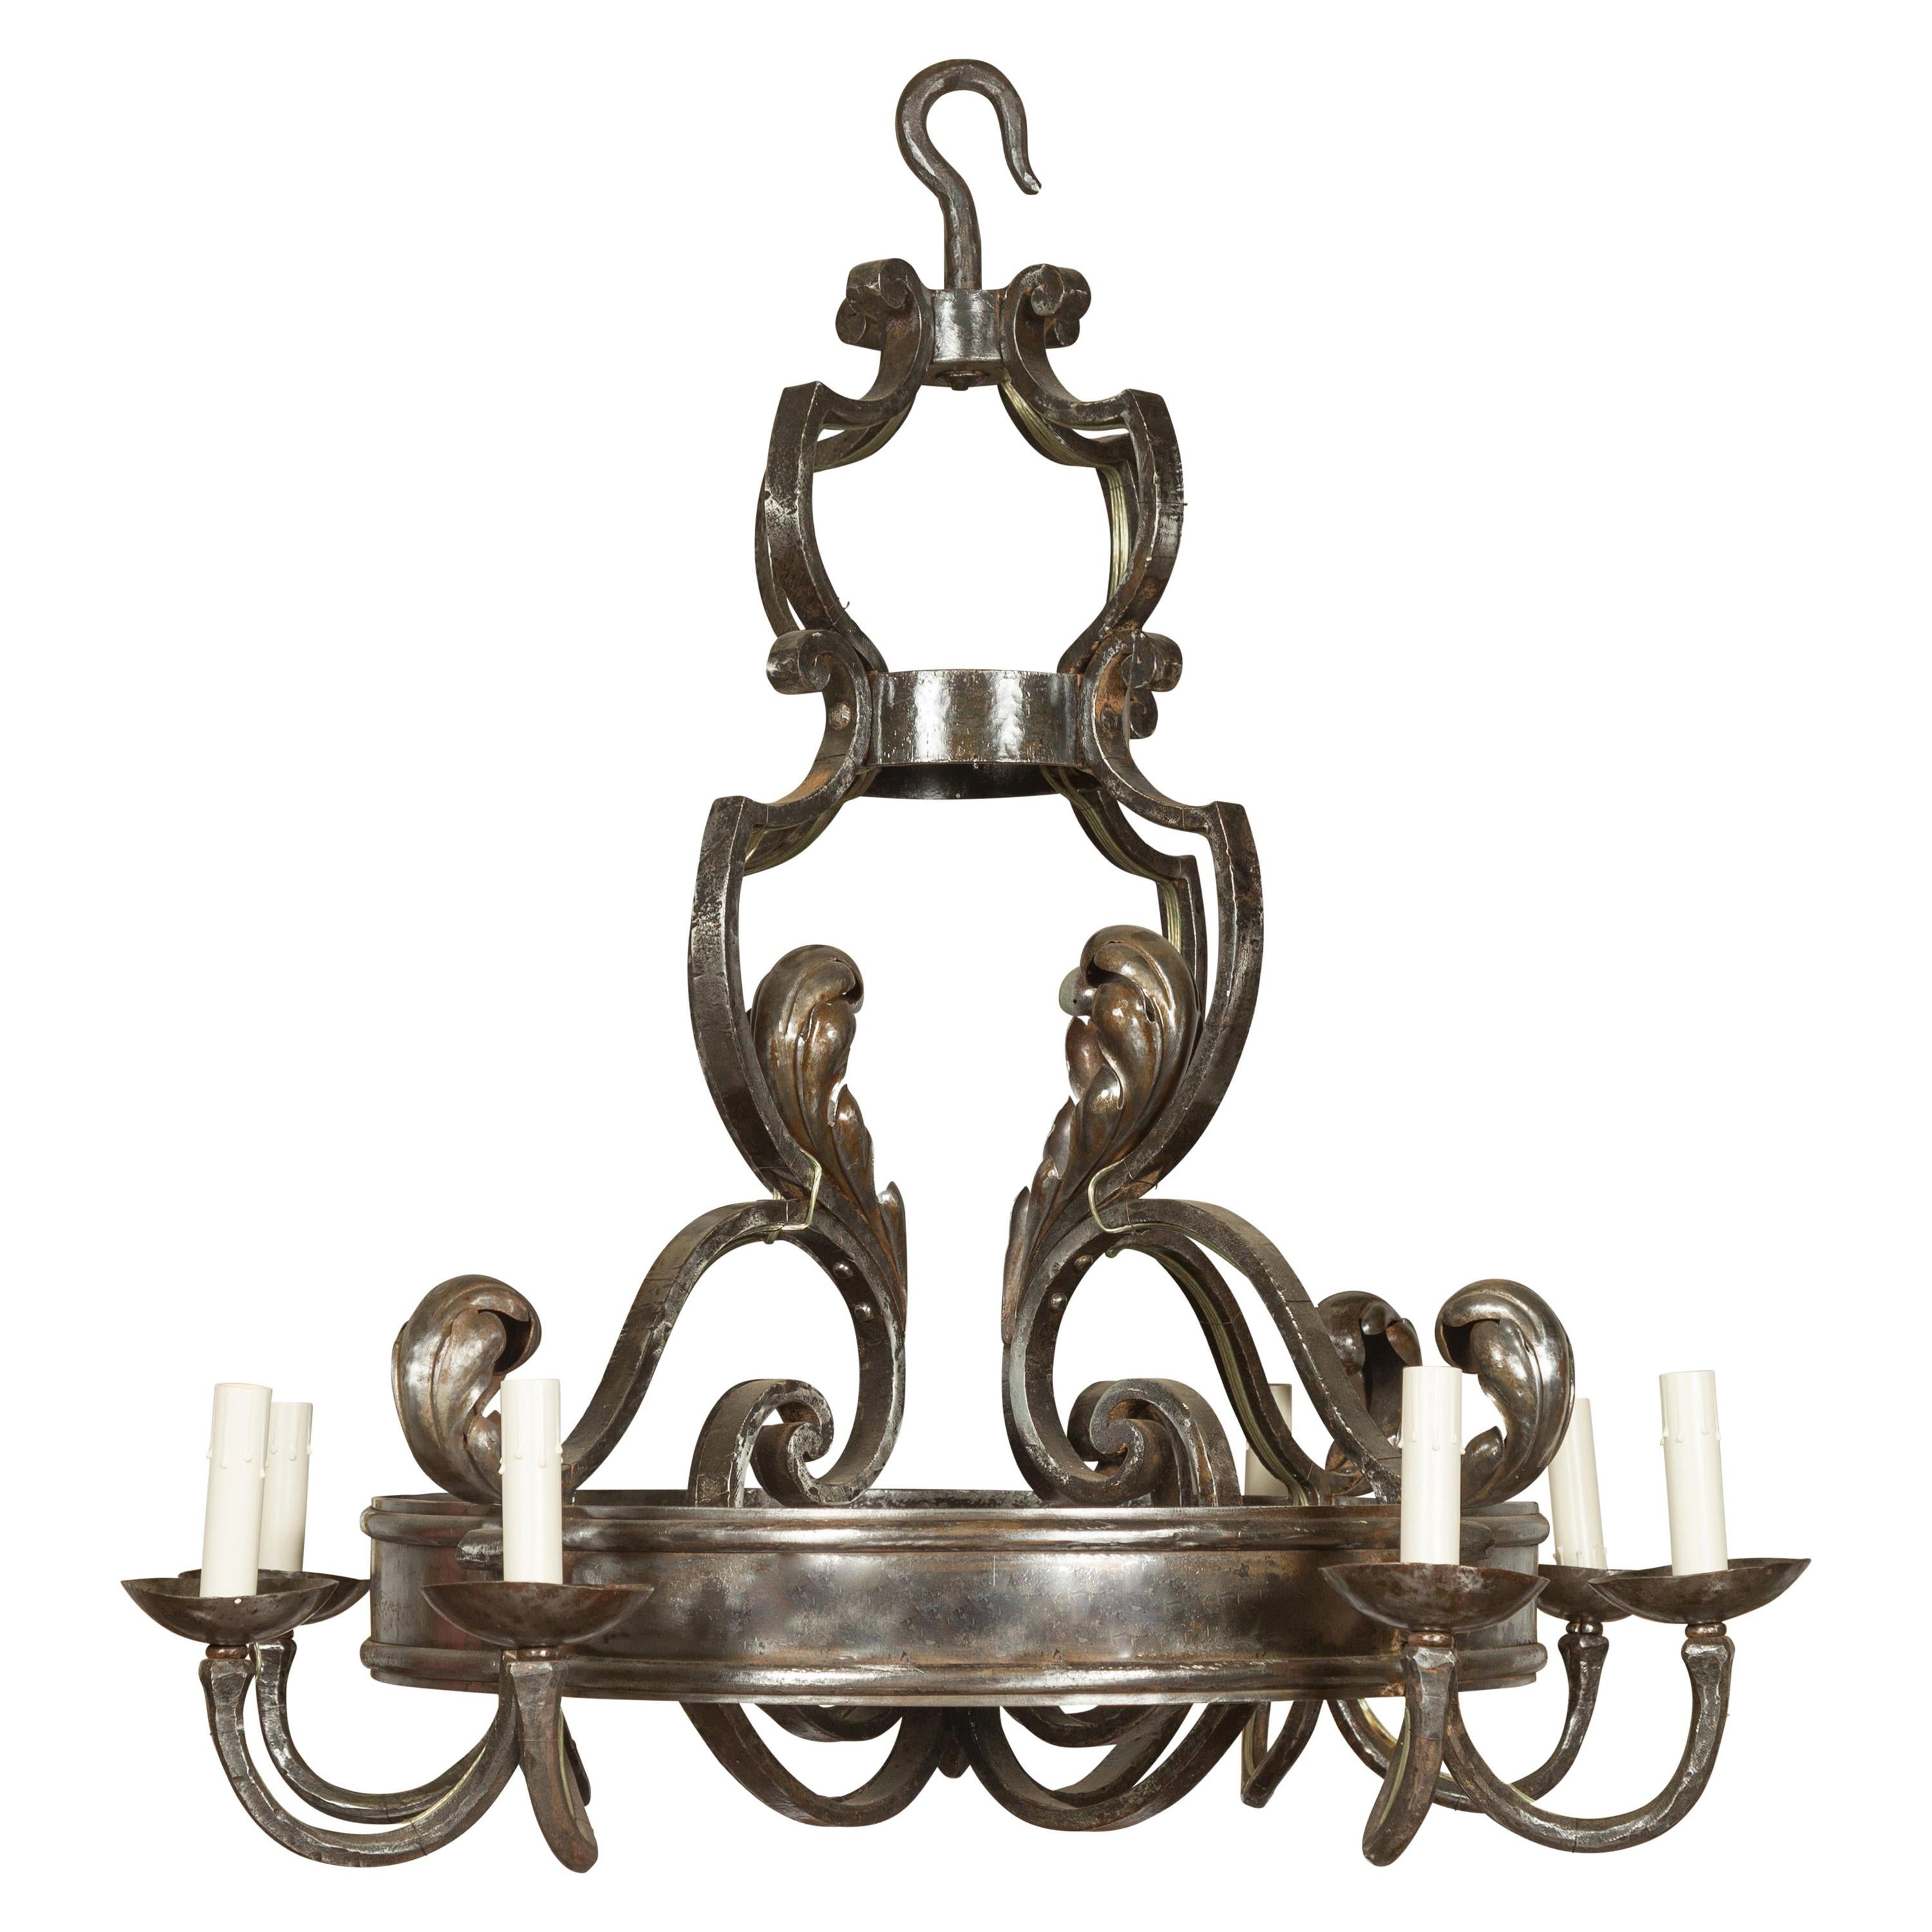 Midcentury French Polished Steel Eight Light Acanthus Leaves Ring Chandelier For Sale